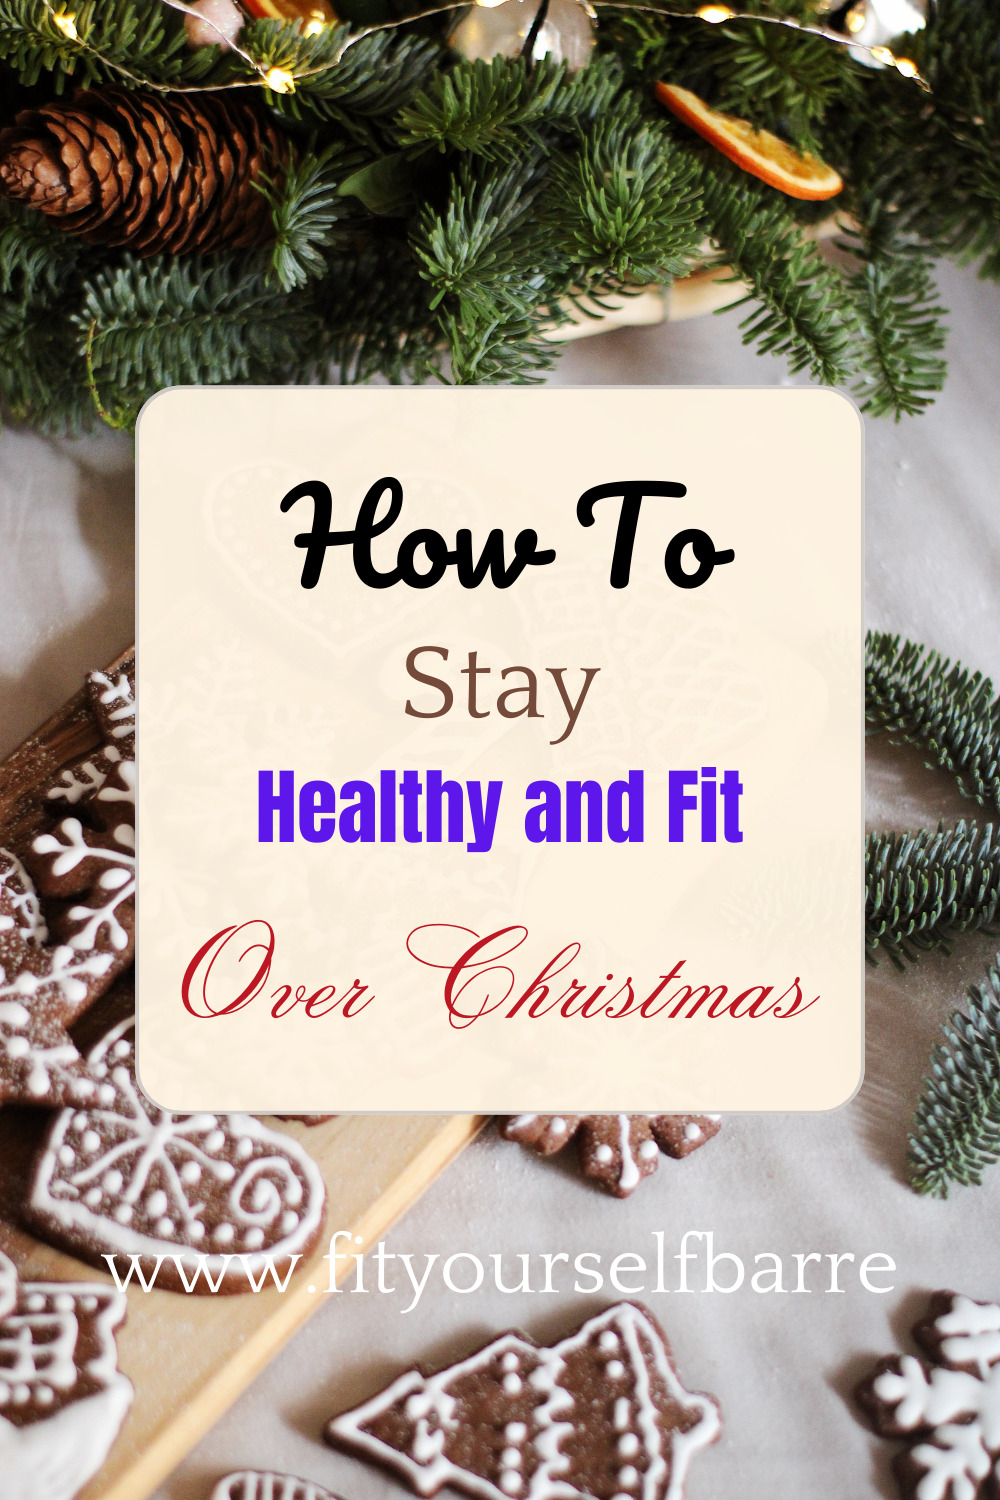 healthy and fit over Christmas-Christmas chocolate cookies and pine branches and cones as decoration